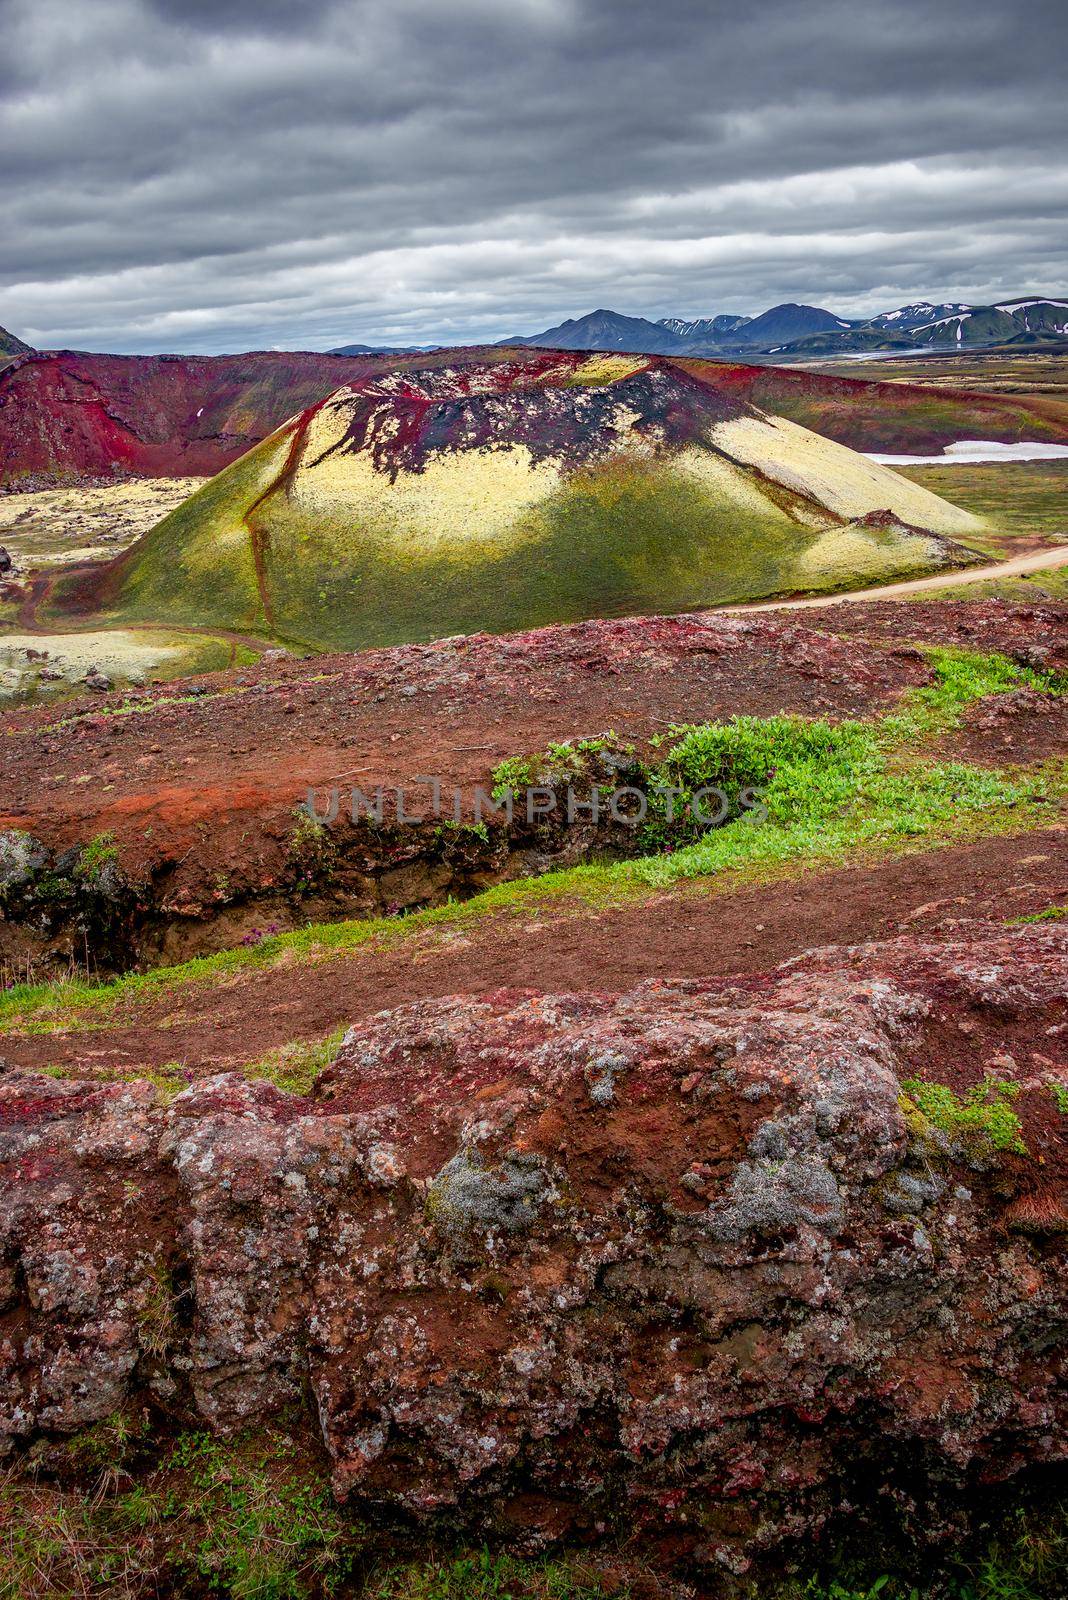 Surreal magic Icelandic landscape of colorful rainbow volcanic Landmannalaugar mountains, red and pink volcanic crater Stutur at famous Laugavegur hiking trail with dramatic sky, Iceland